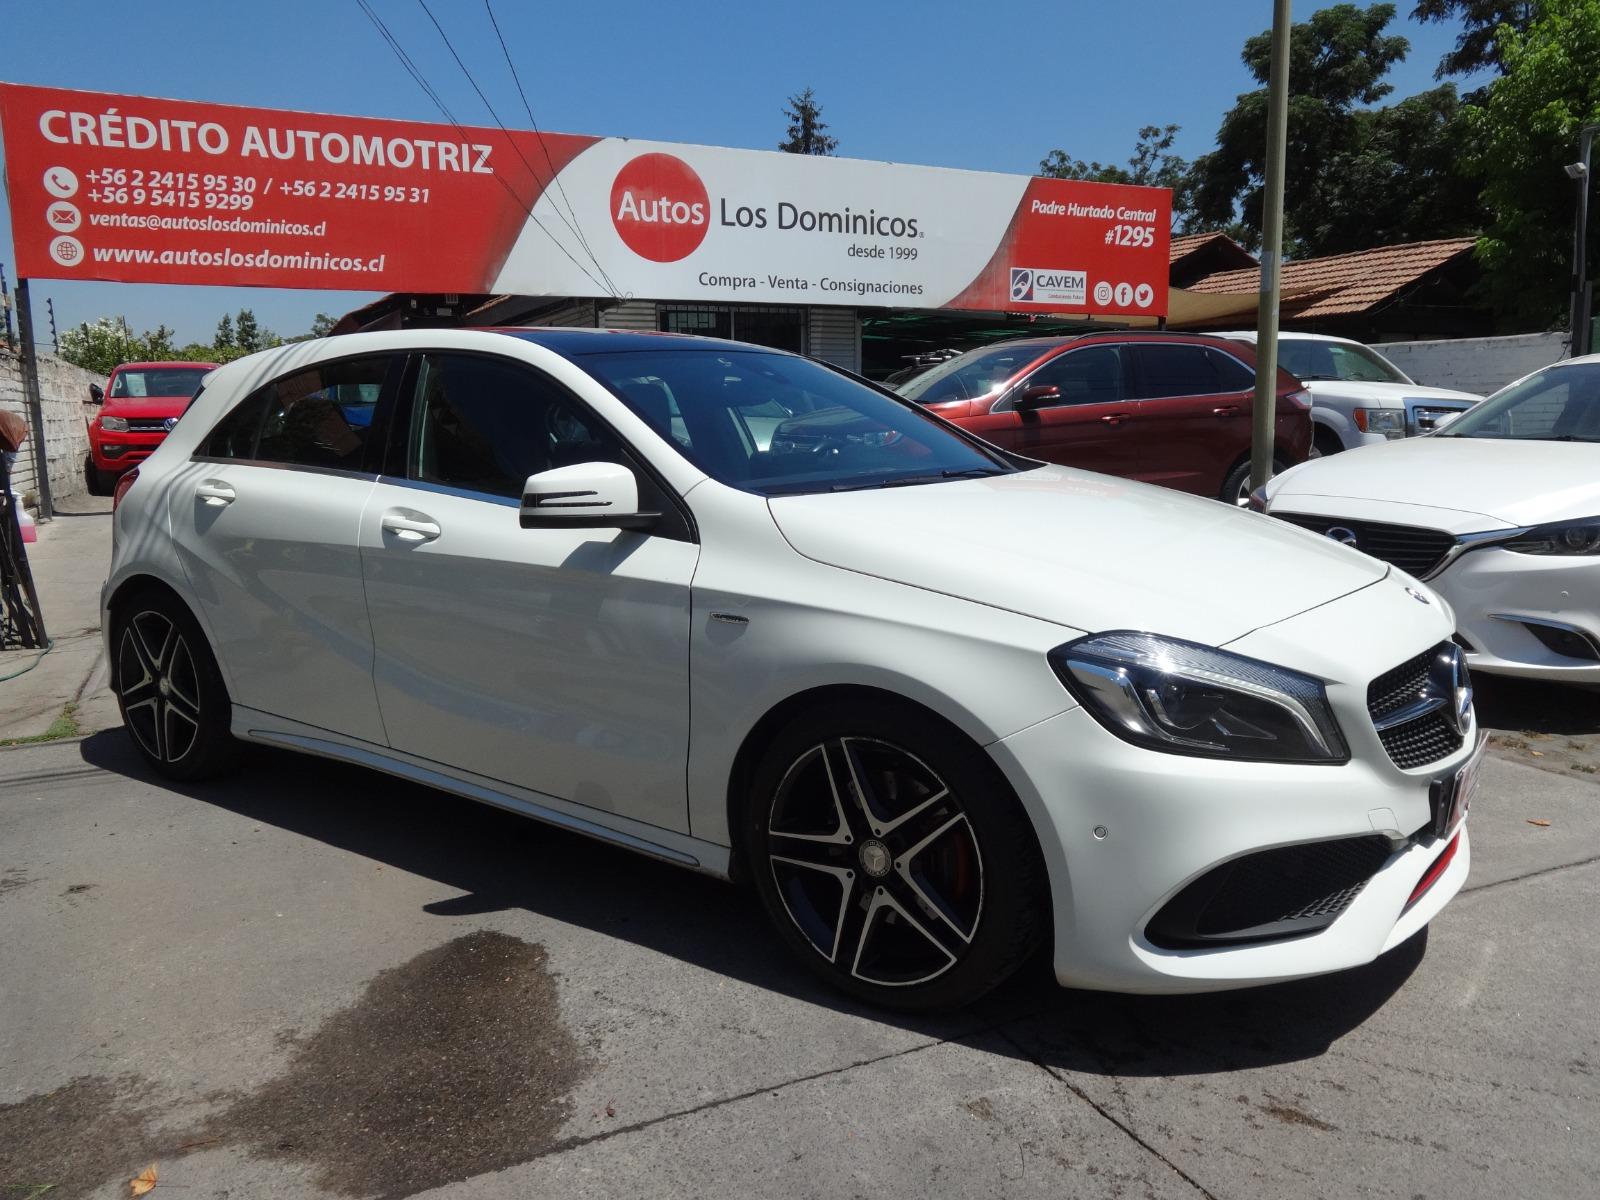 MERCEDES-BENZ A250 SPORT 2.0 AUT SOLO 60.000 KM  2016 FULL CarPlay TECHO PANORÁMICO AIRE AIRBAG ABS CAMA - 